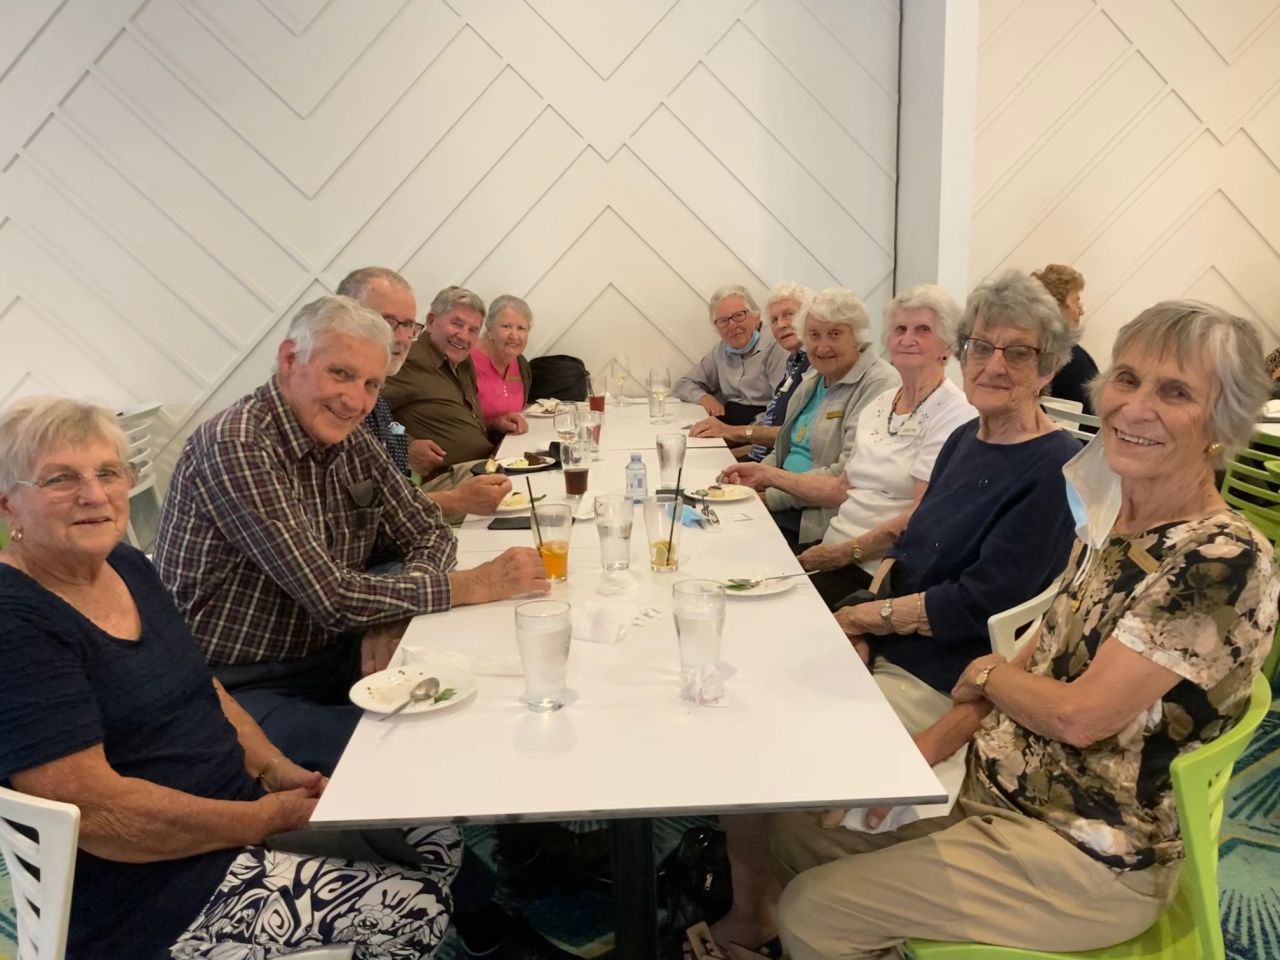 Members and guests enjoying lunch at the Redcliffe Leagues Club during a day outing in Sept 2021